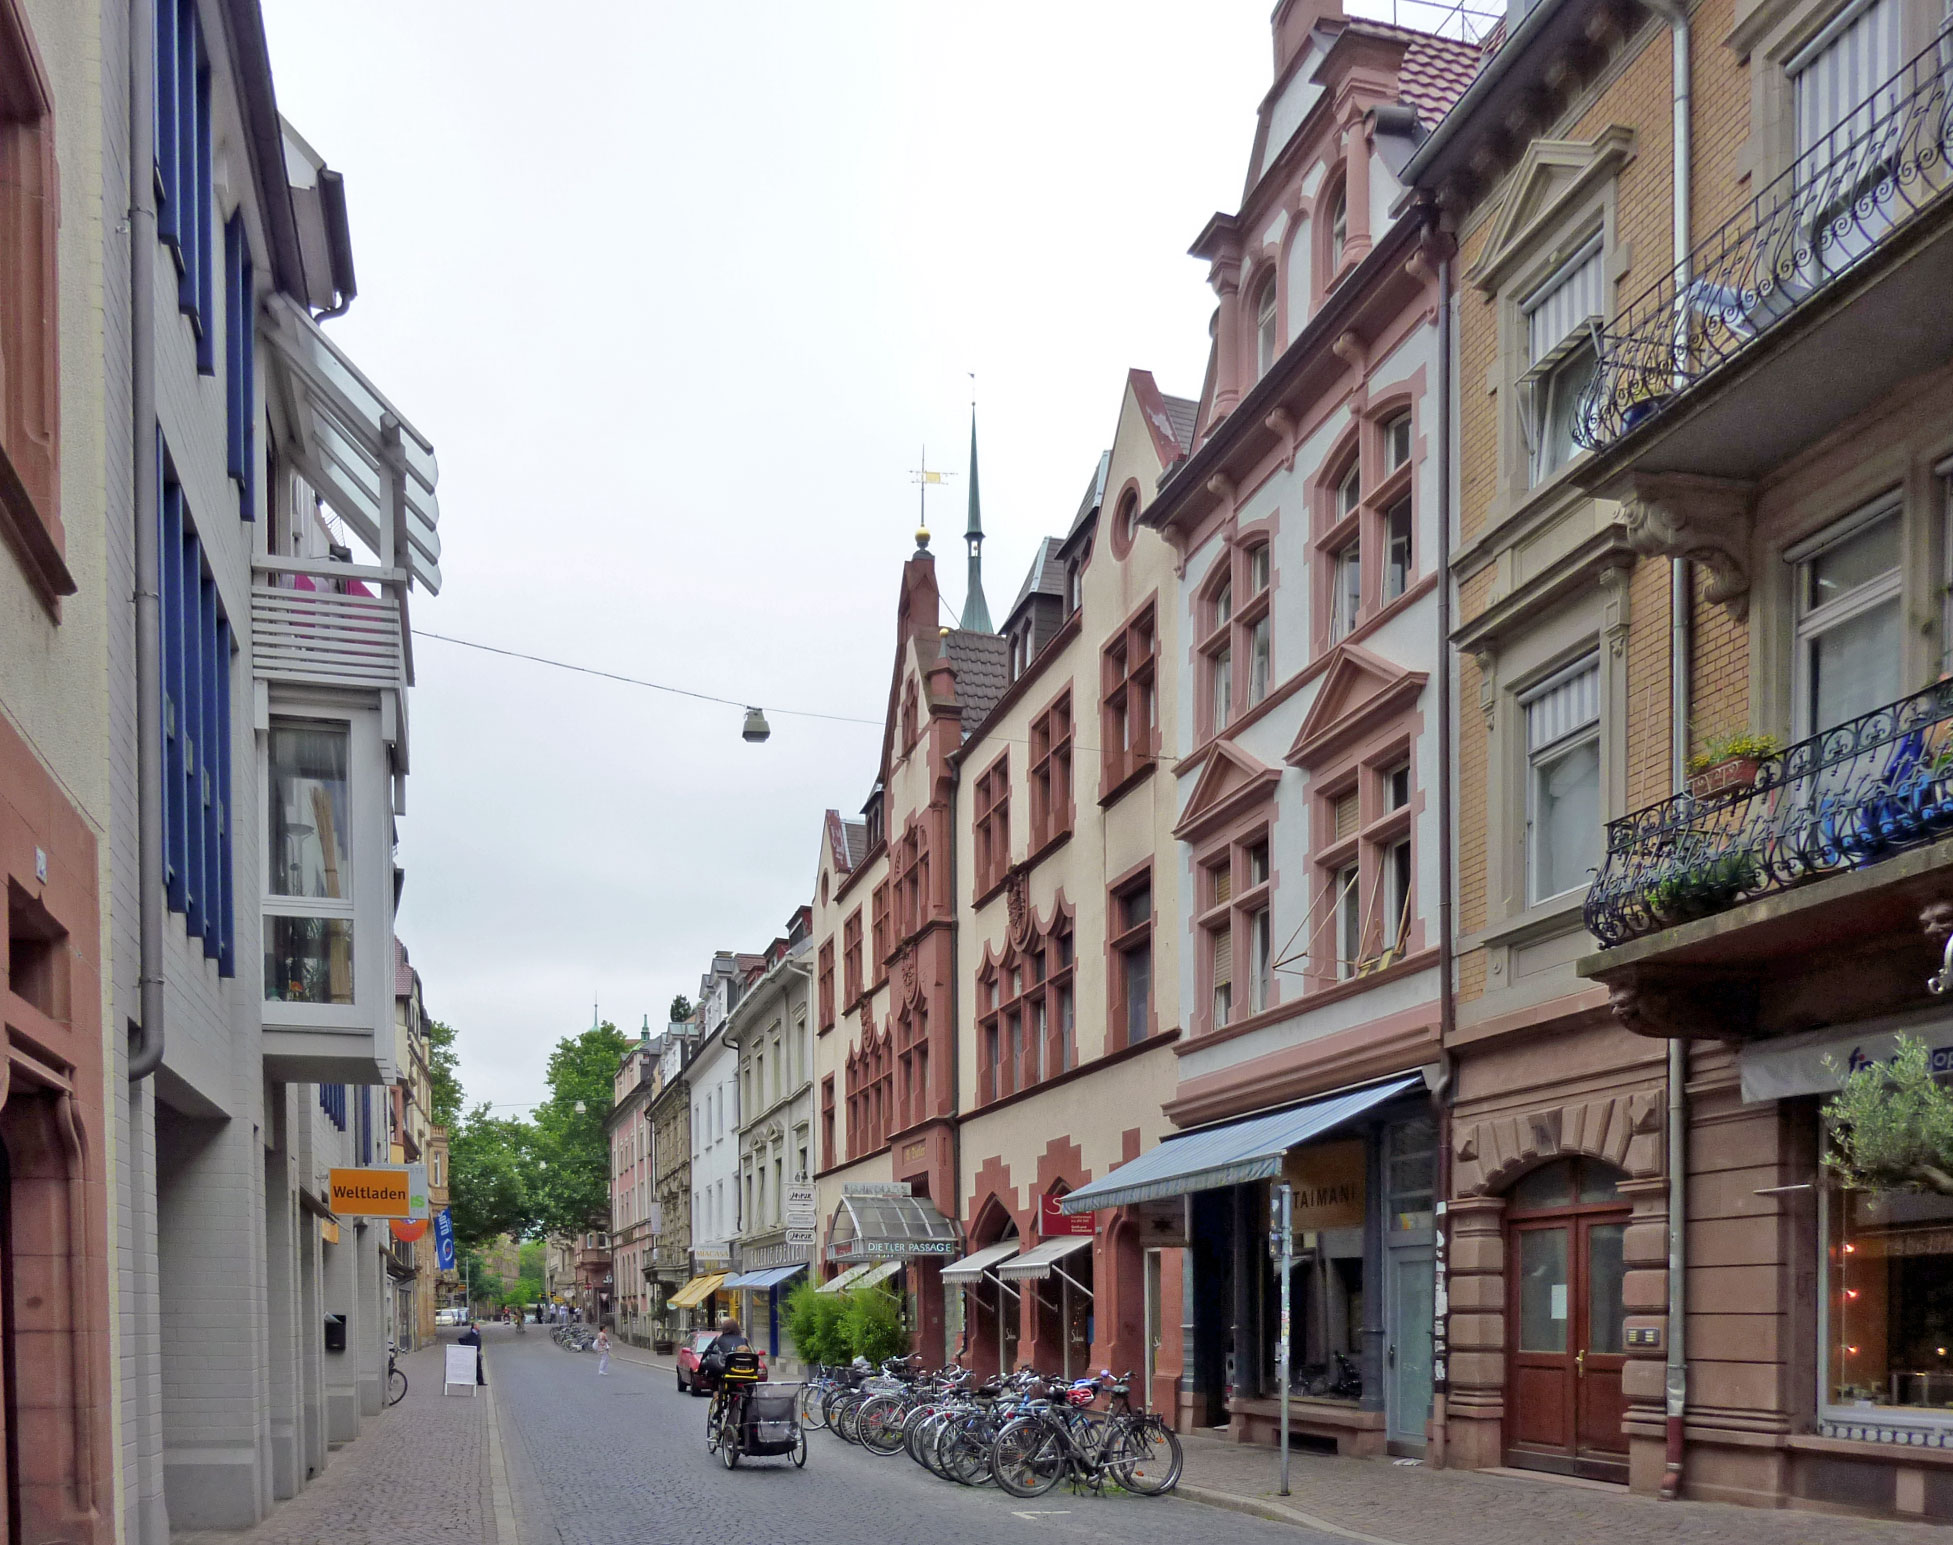 the view of several buildings, including many bicycles, is looking down a street in a european town